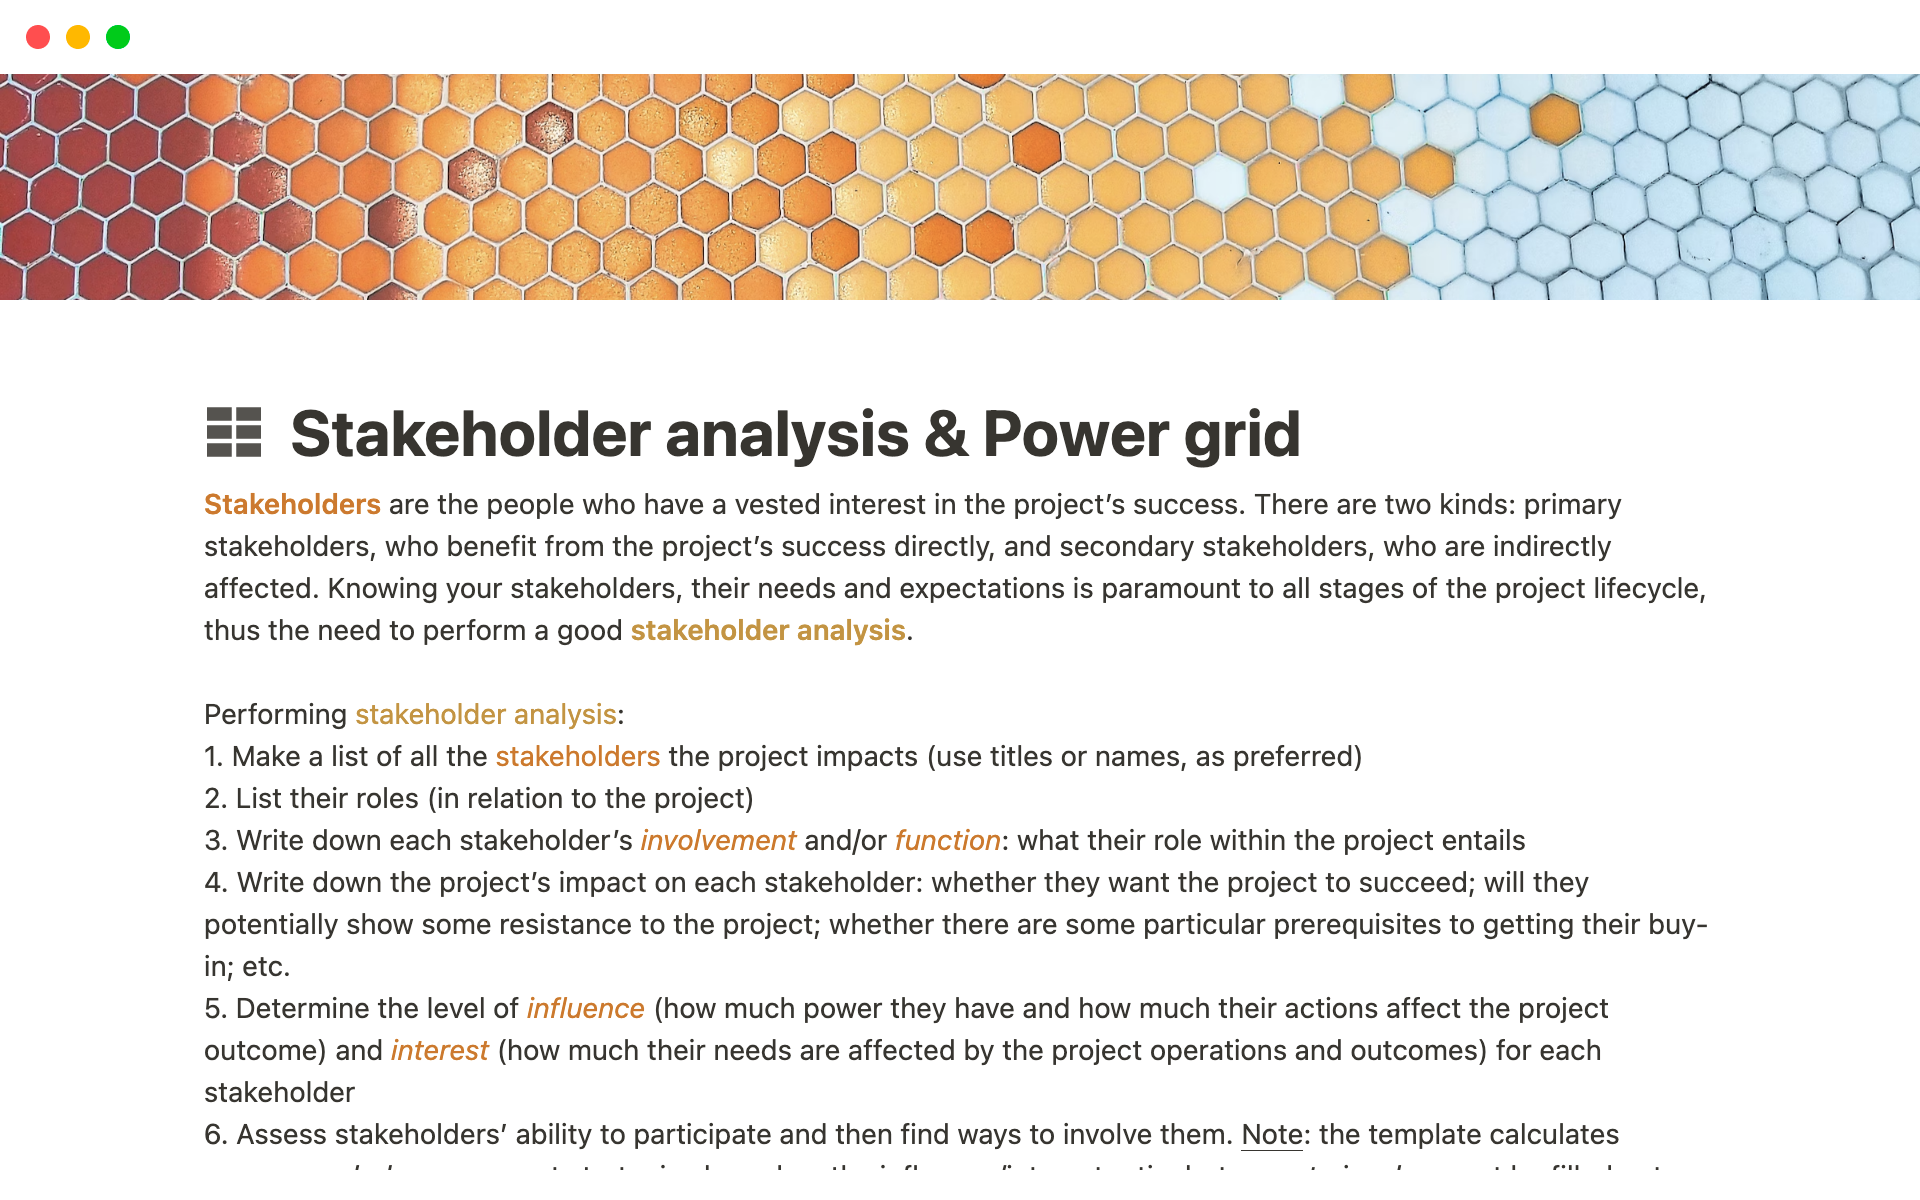 Allows you to perform stakeholder analysis, build a stakeholder power grid and get suggestions for forming a steering committee, all inside Notion.